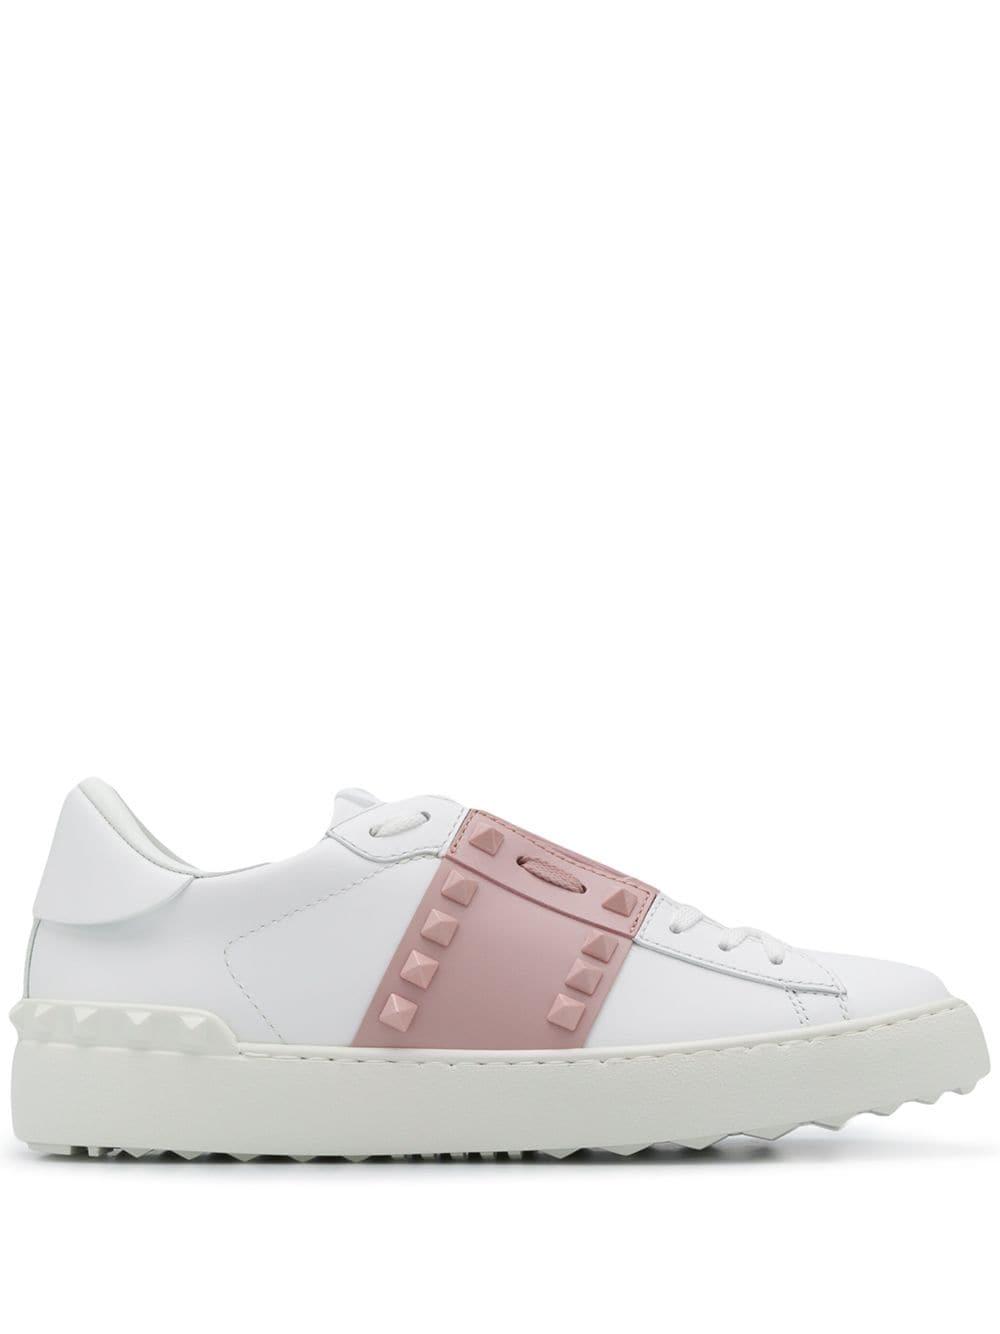 Valentino Garavani Leather Untitled Low-top Sneakers in White - Lyst